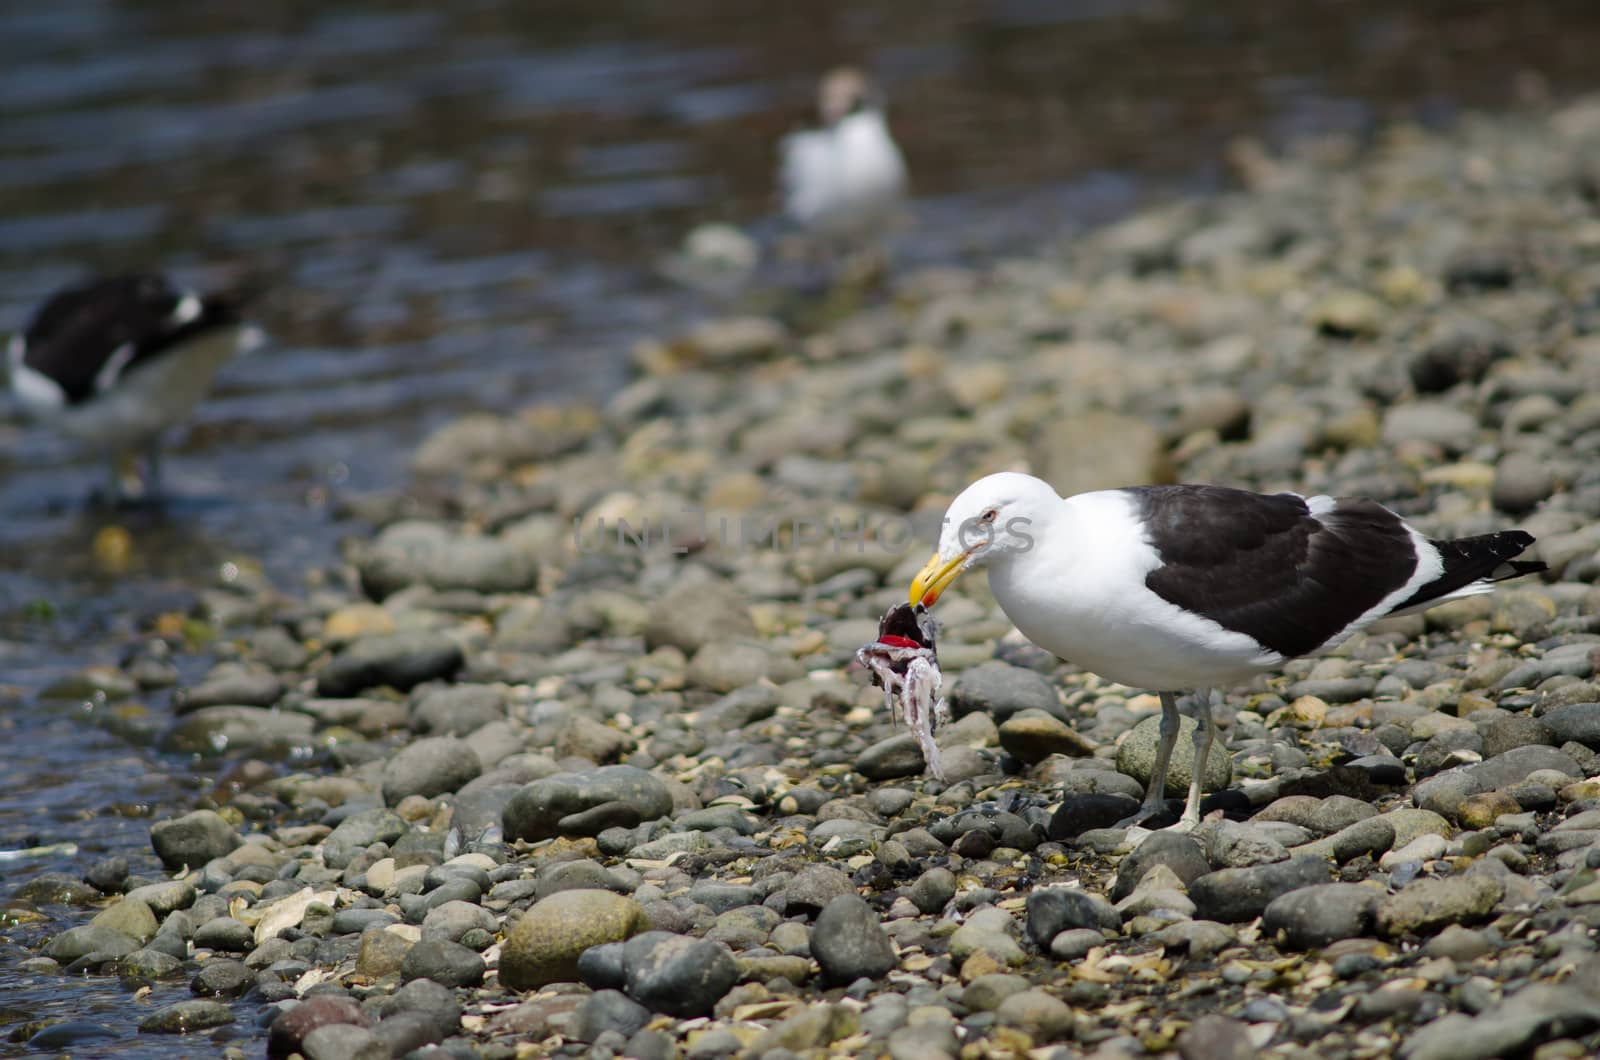 Kelp gull eating the remains of a fish. by VictorSuarez